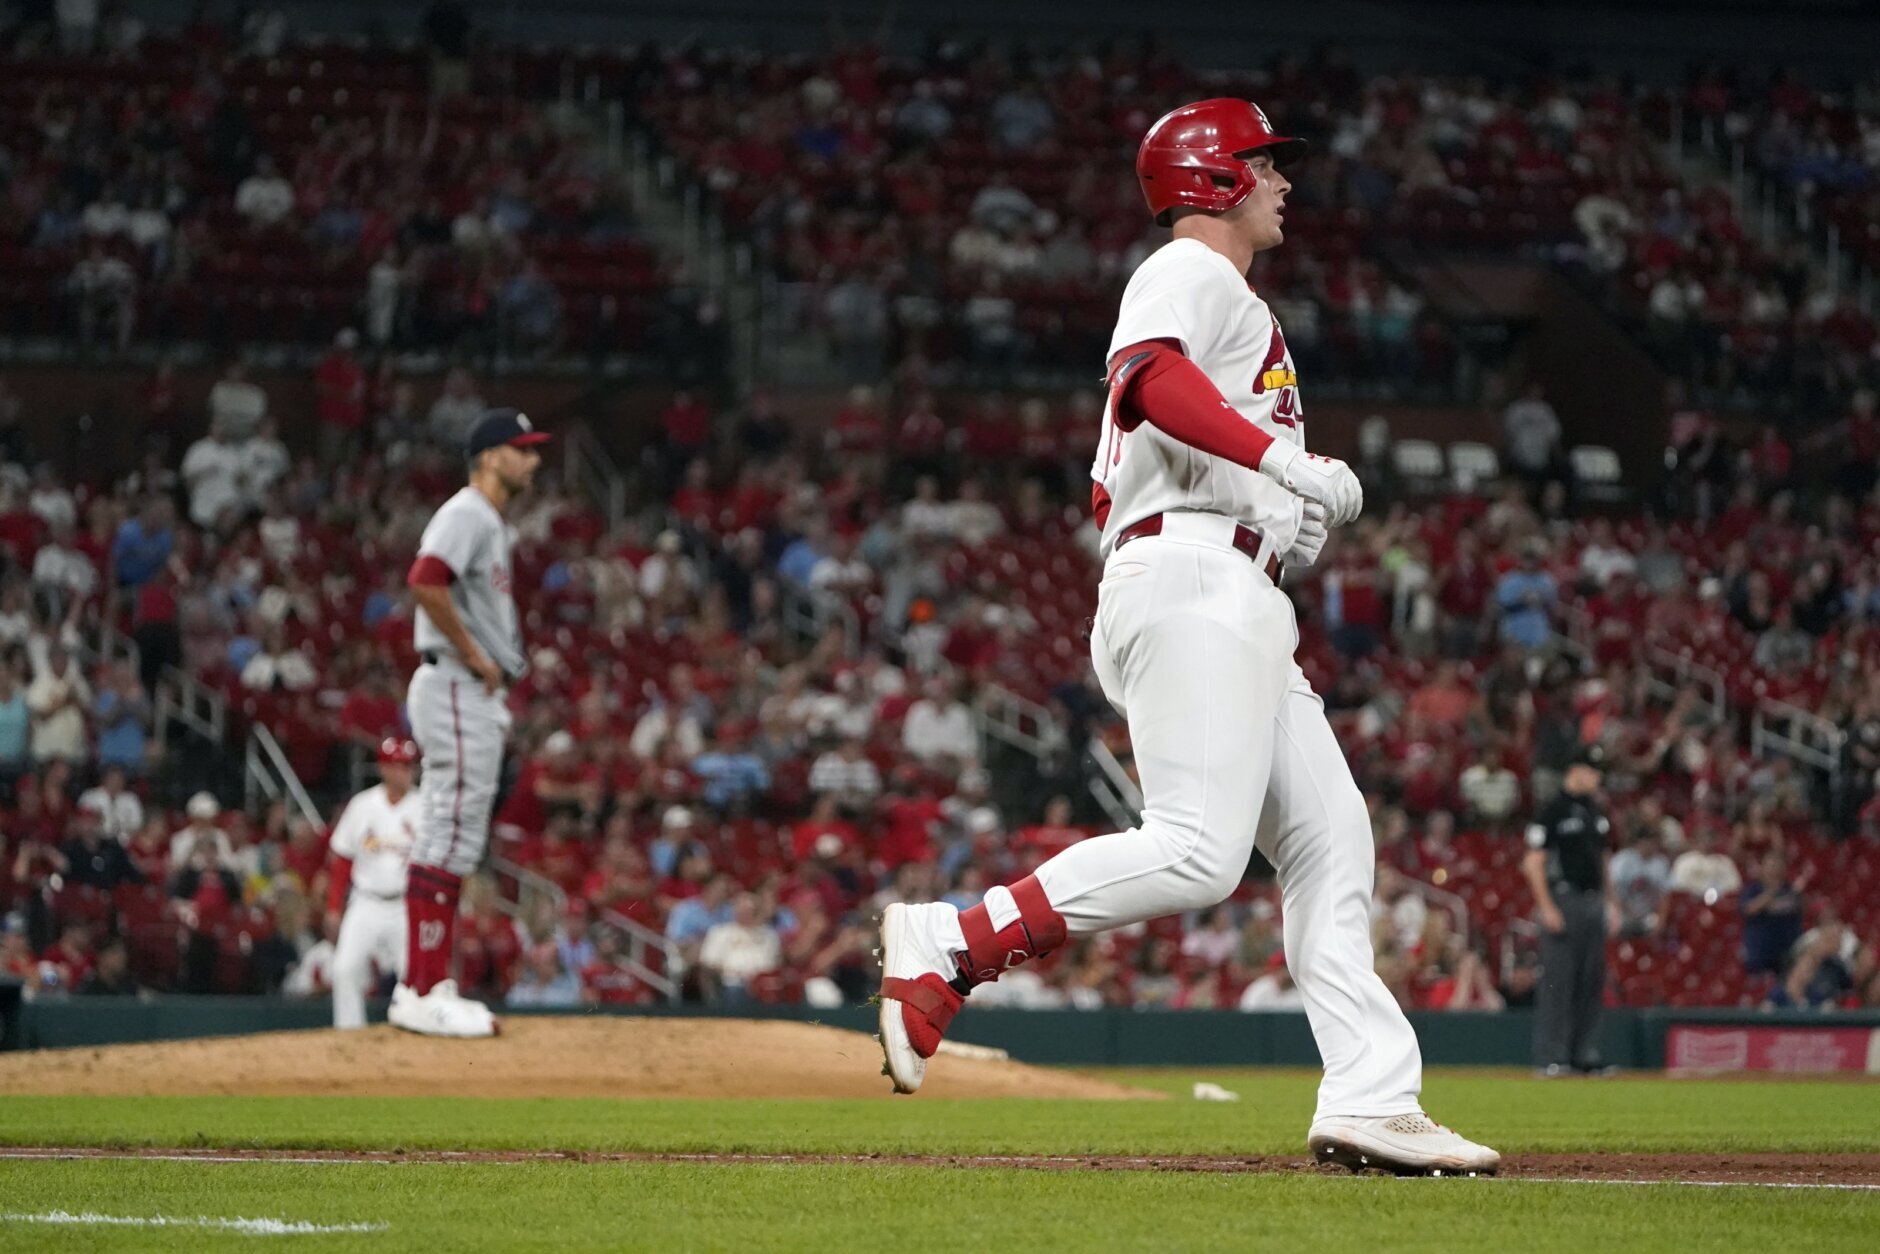 Ten Hochman: What's going on with the Cardinals' Nolan Gorman, the slugger  not slugging?